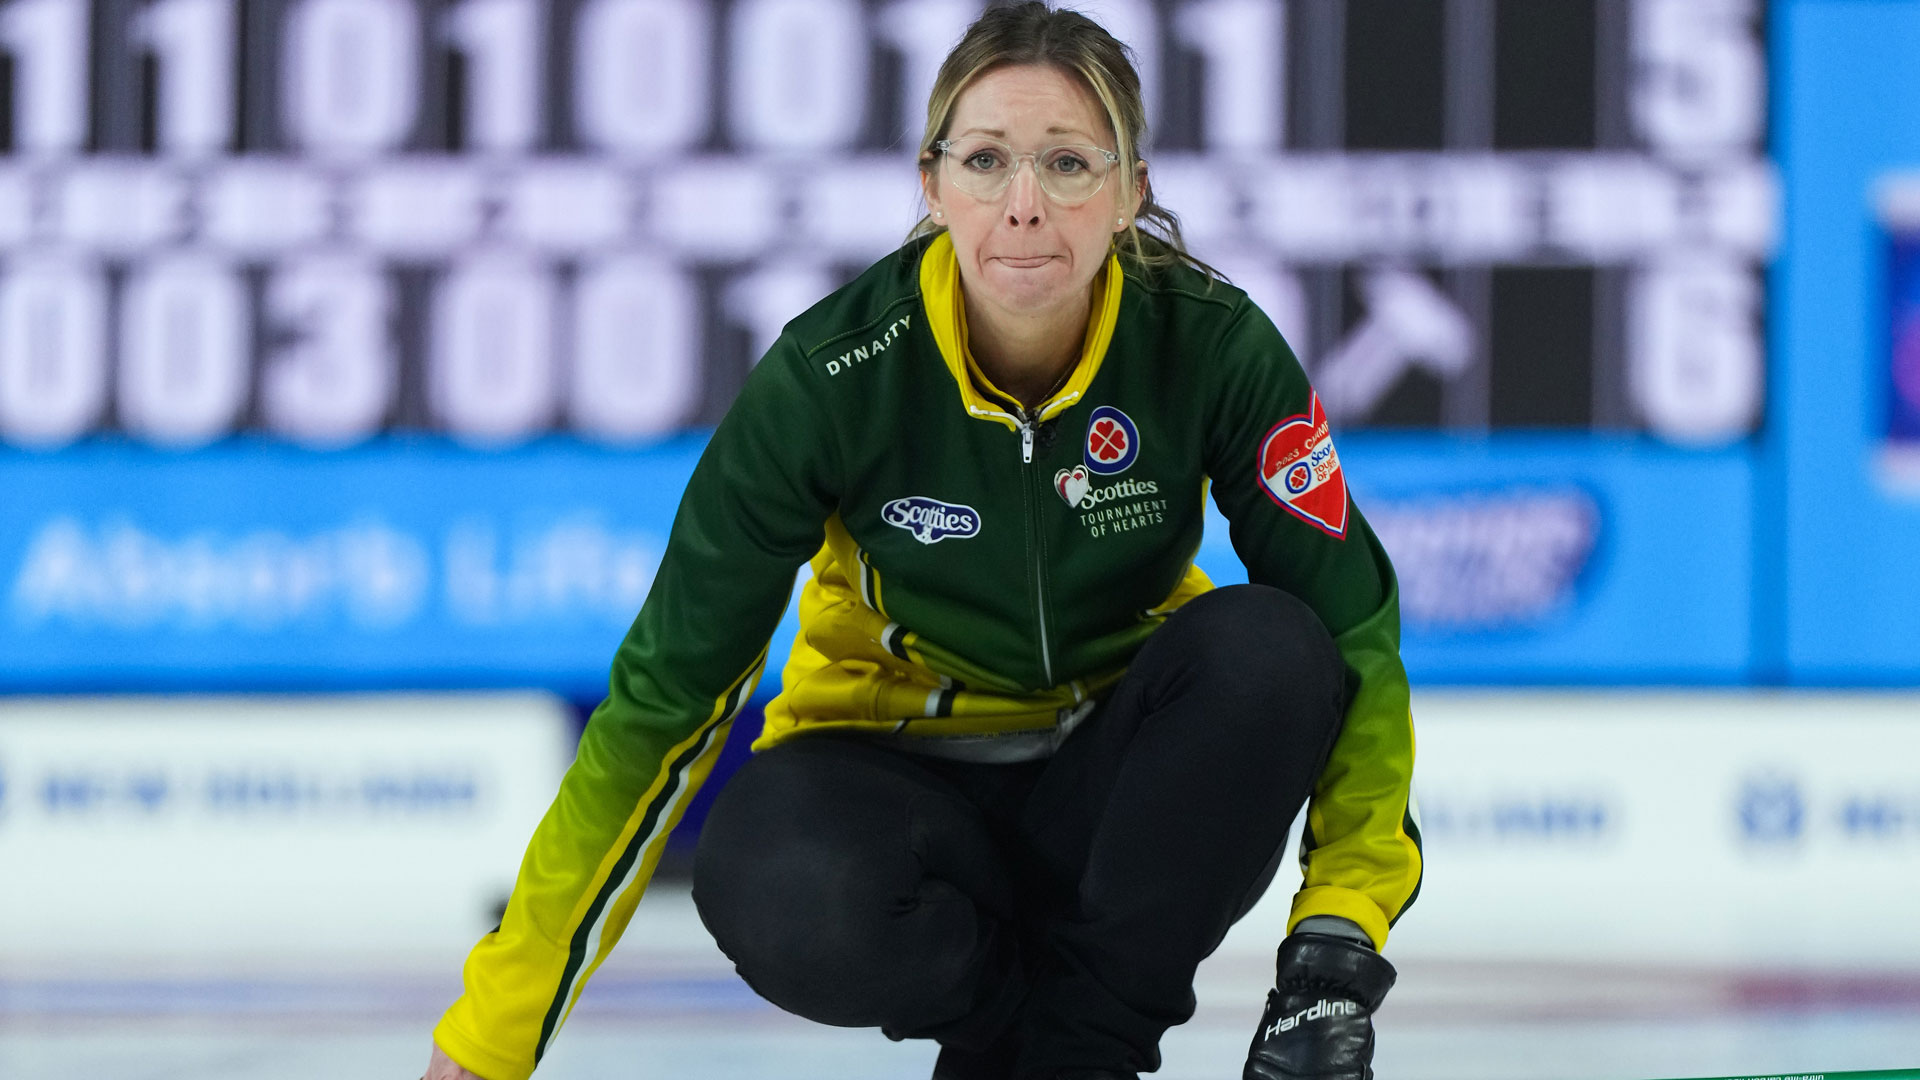 Scotties Tournament of Hearts Preview